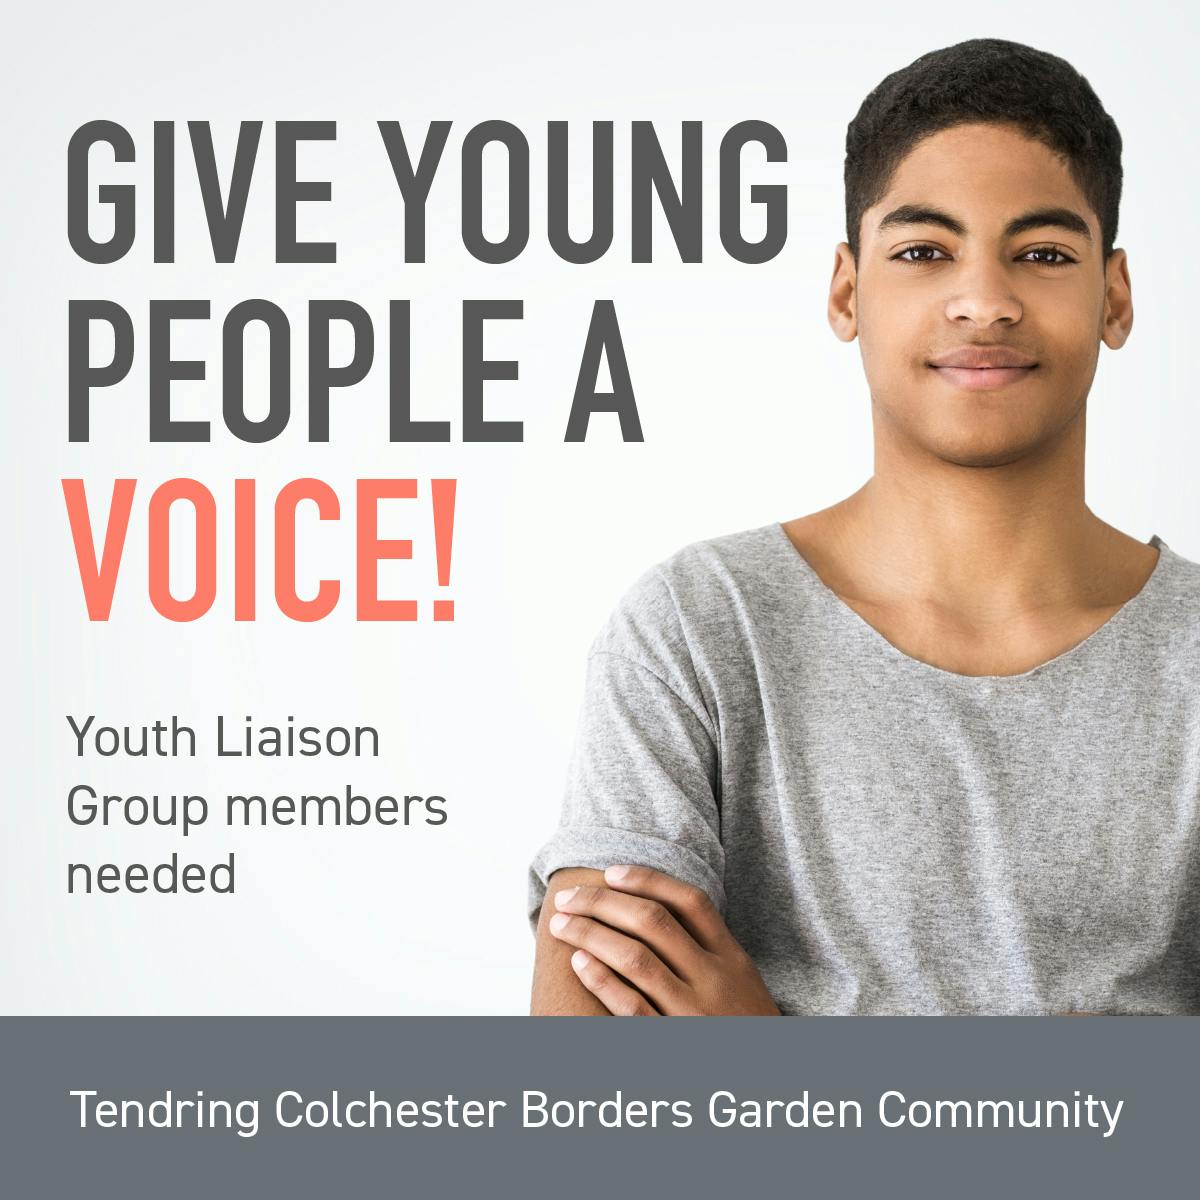 Youth Liaison Group